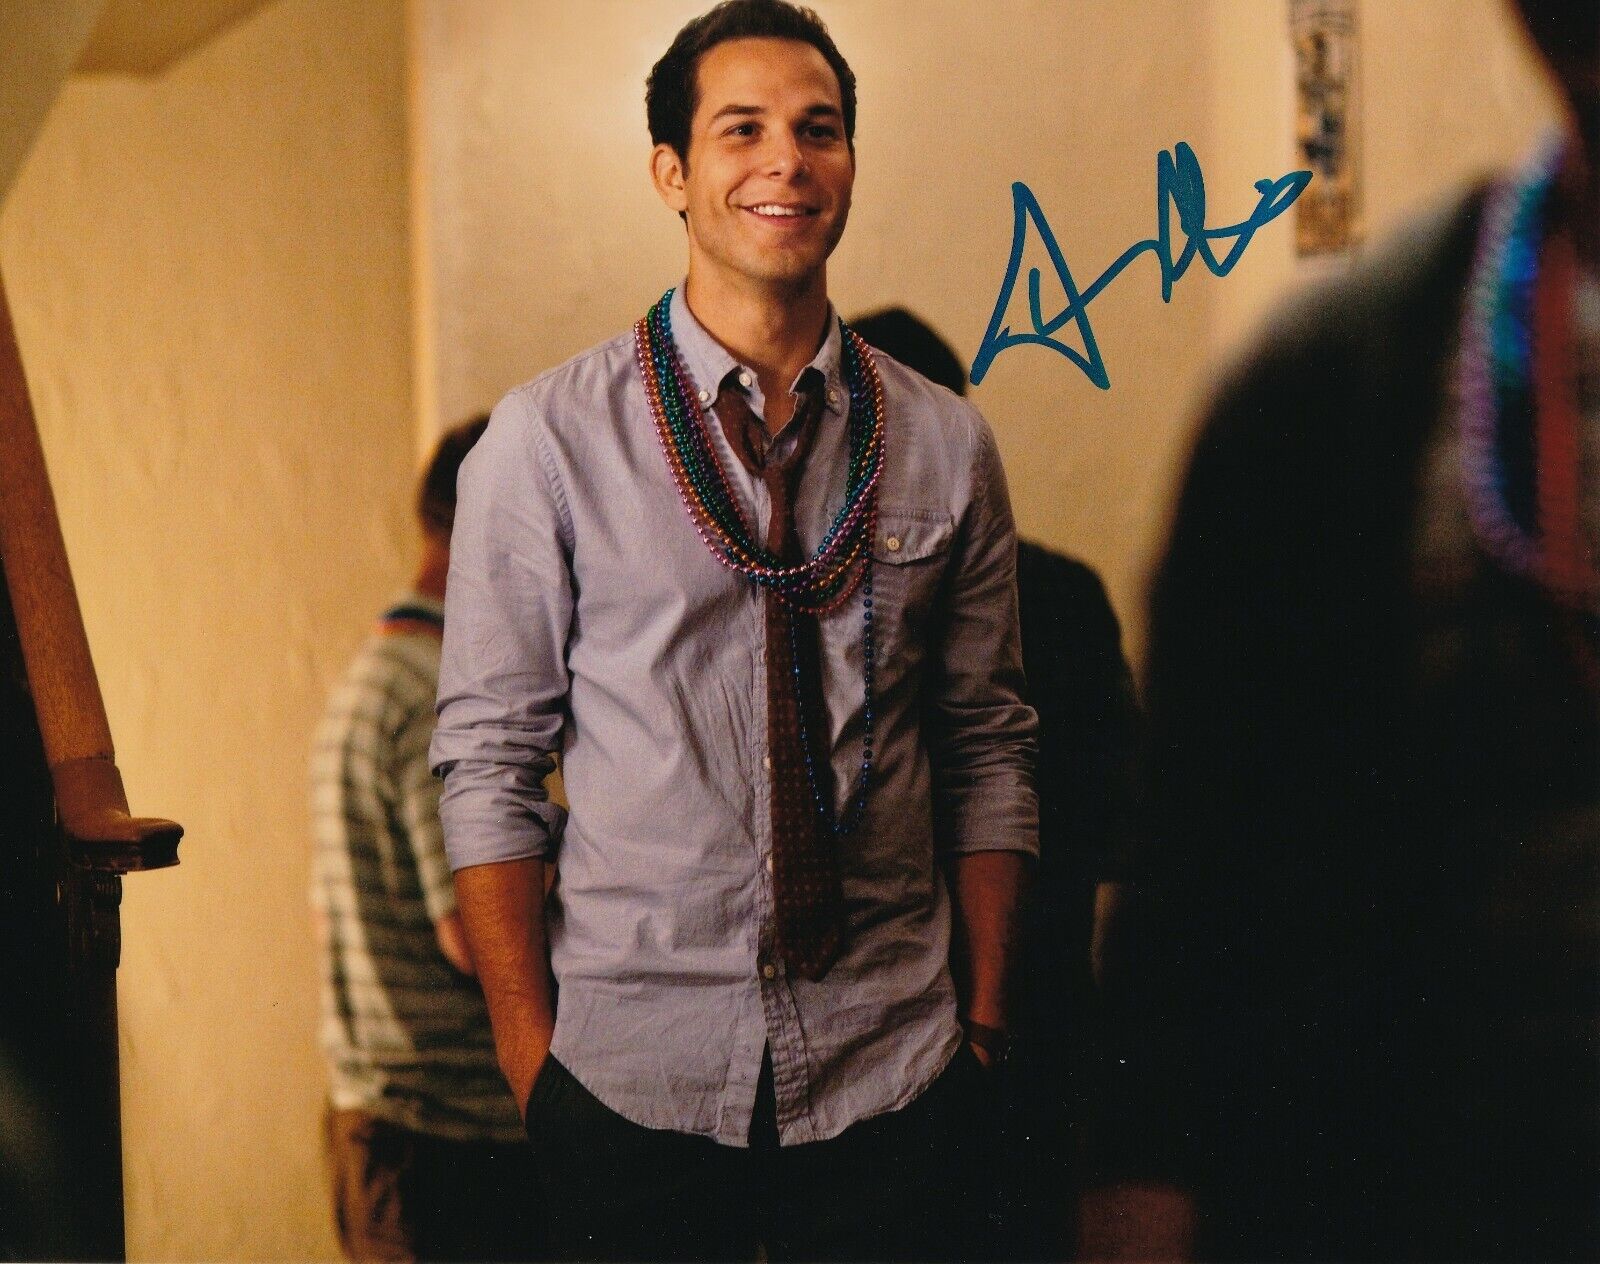 Skylar Astin actor REAL hand SIGNED 8x10 Photo Poster painting #3 COA Pitch Perfect Trolls